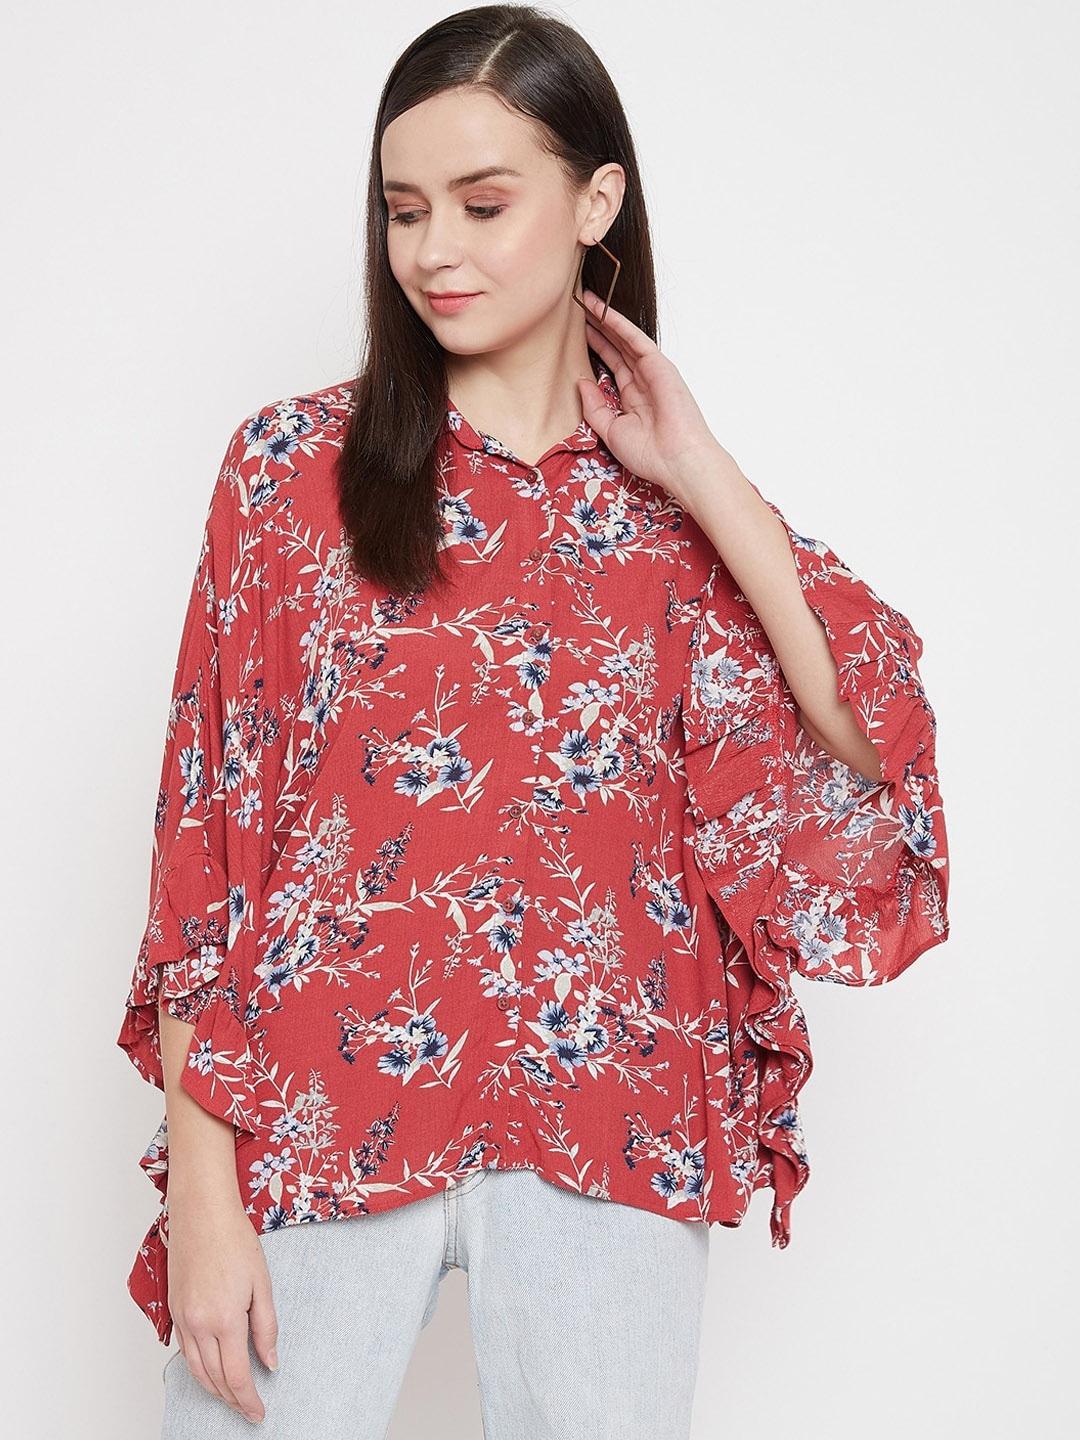 Crimsoune Club Red Floral Printed Flared Sleeves Shirt Style Top